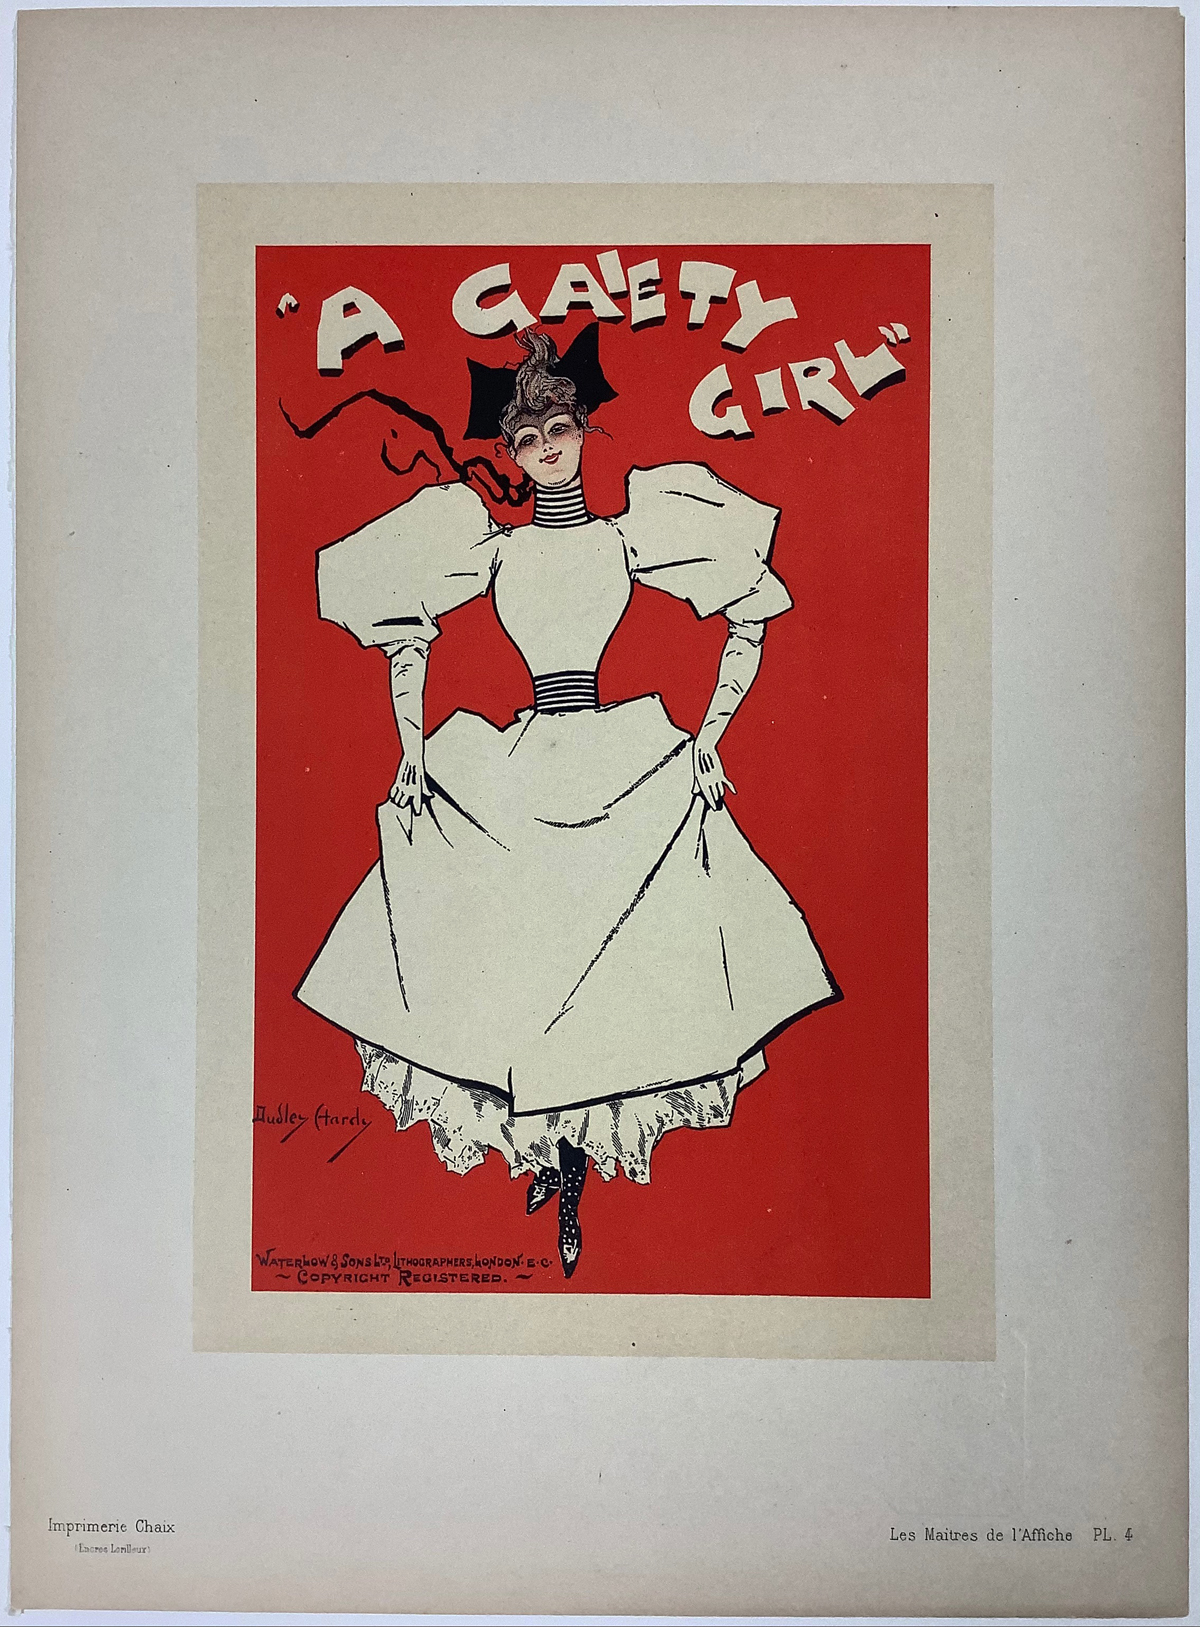 A Gaiety Girl Original Les Maitres De L'Affiche Plate 4 by Dudley Hardy 1896. This lithograph shows a woman in a white dress dancing / skipping on a red background advertising a musical comedy. Original Vintage Poster.